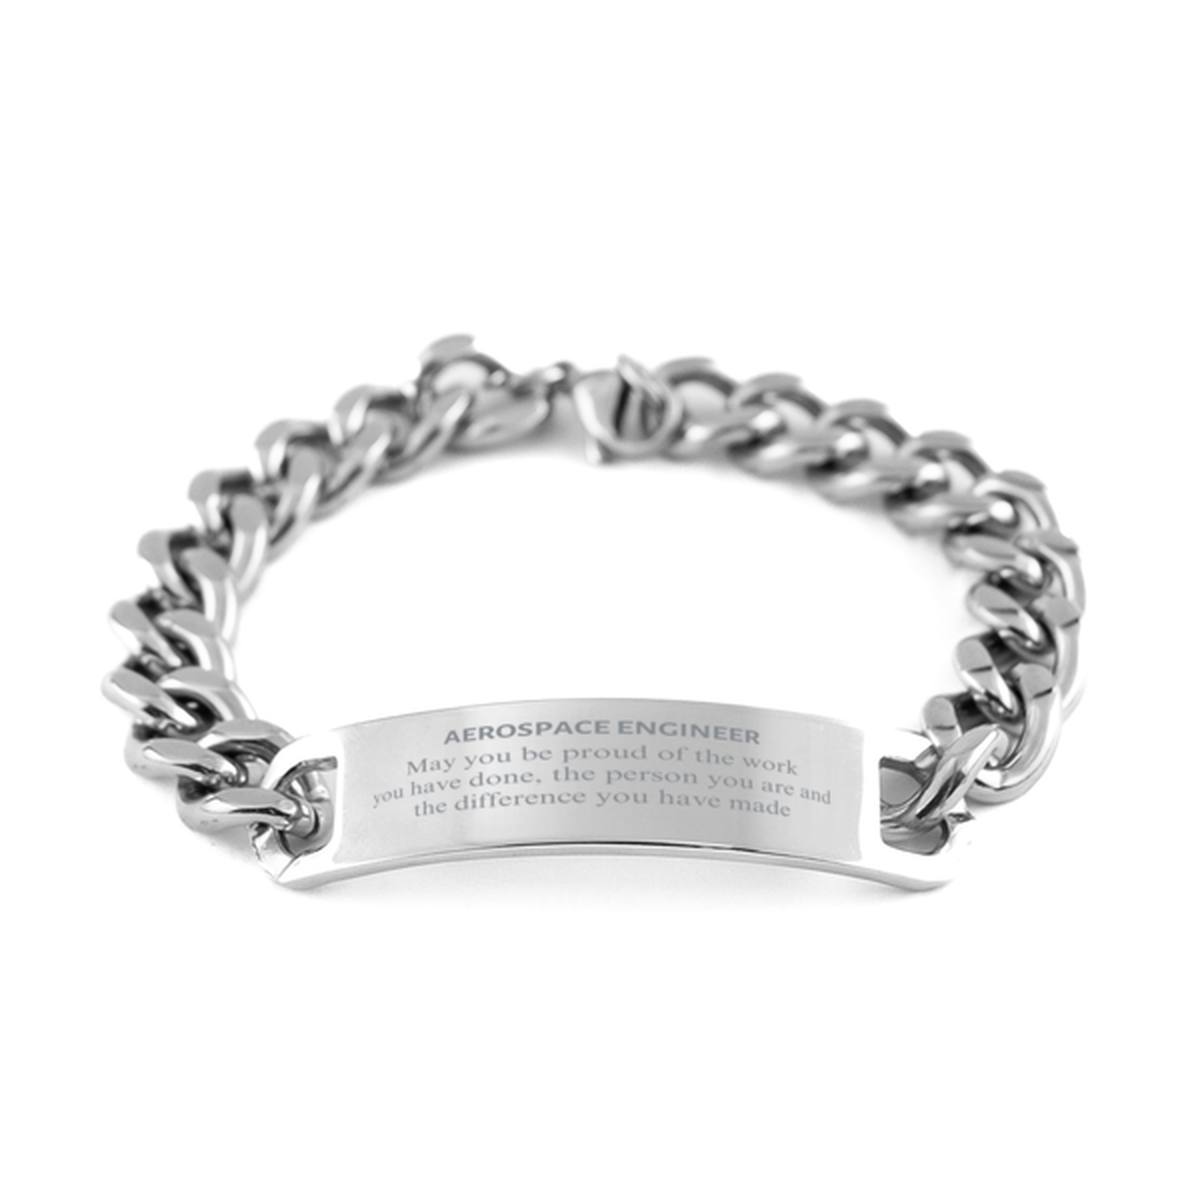 Aerospace Engineer May you be proud of the work you have done, Retirement Aerospace Engineer Cuban Chain Stainless Steel Bracelet for Colleague Appreciation Gifts Amazing for Aerospace Engineer